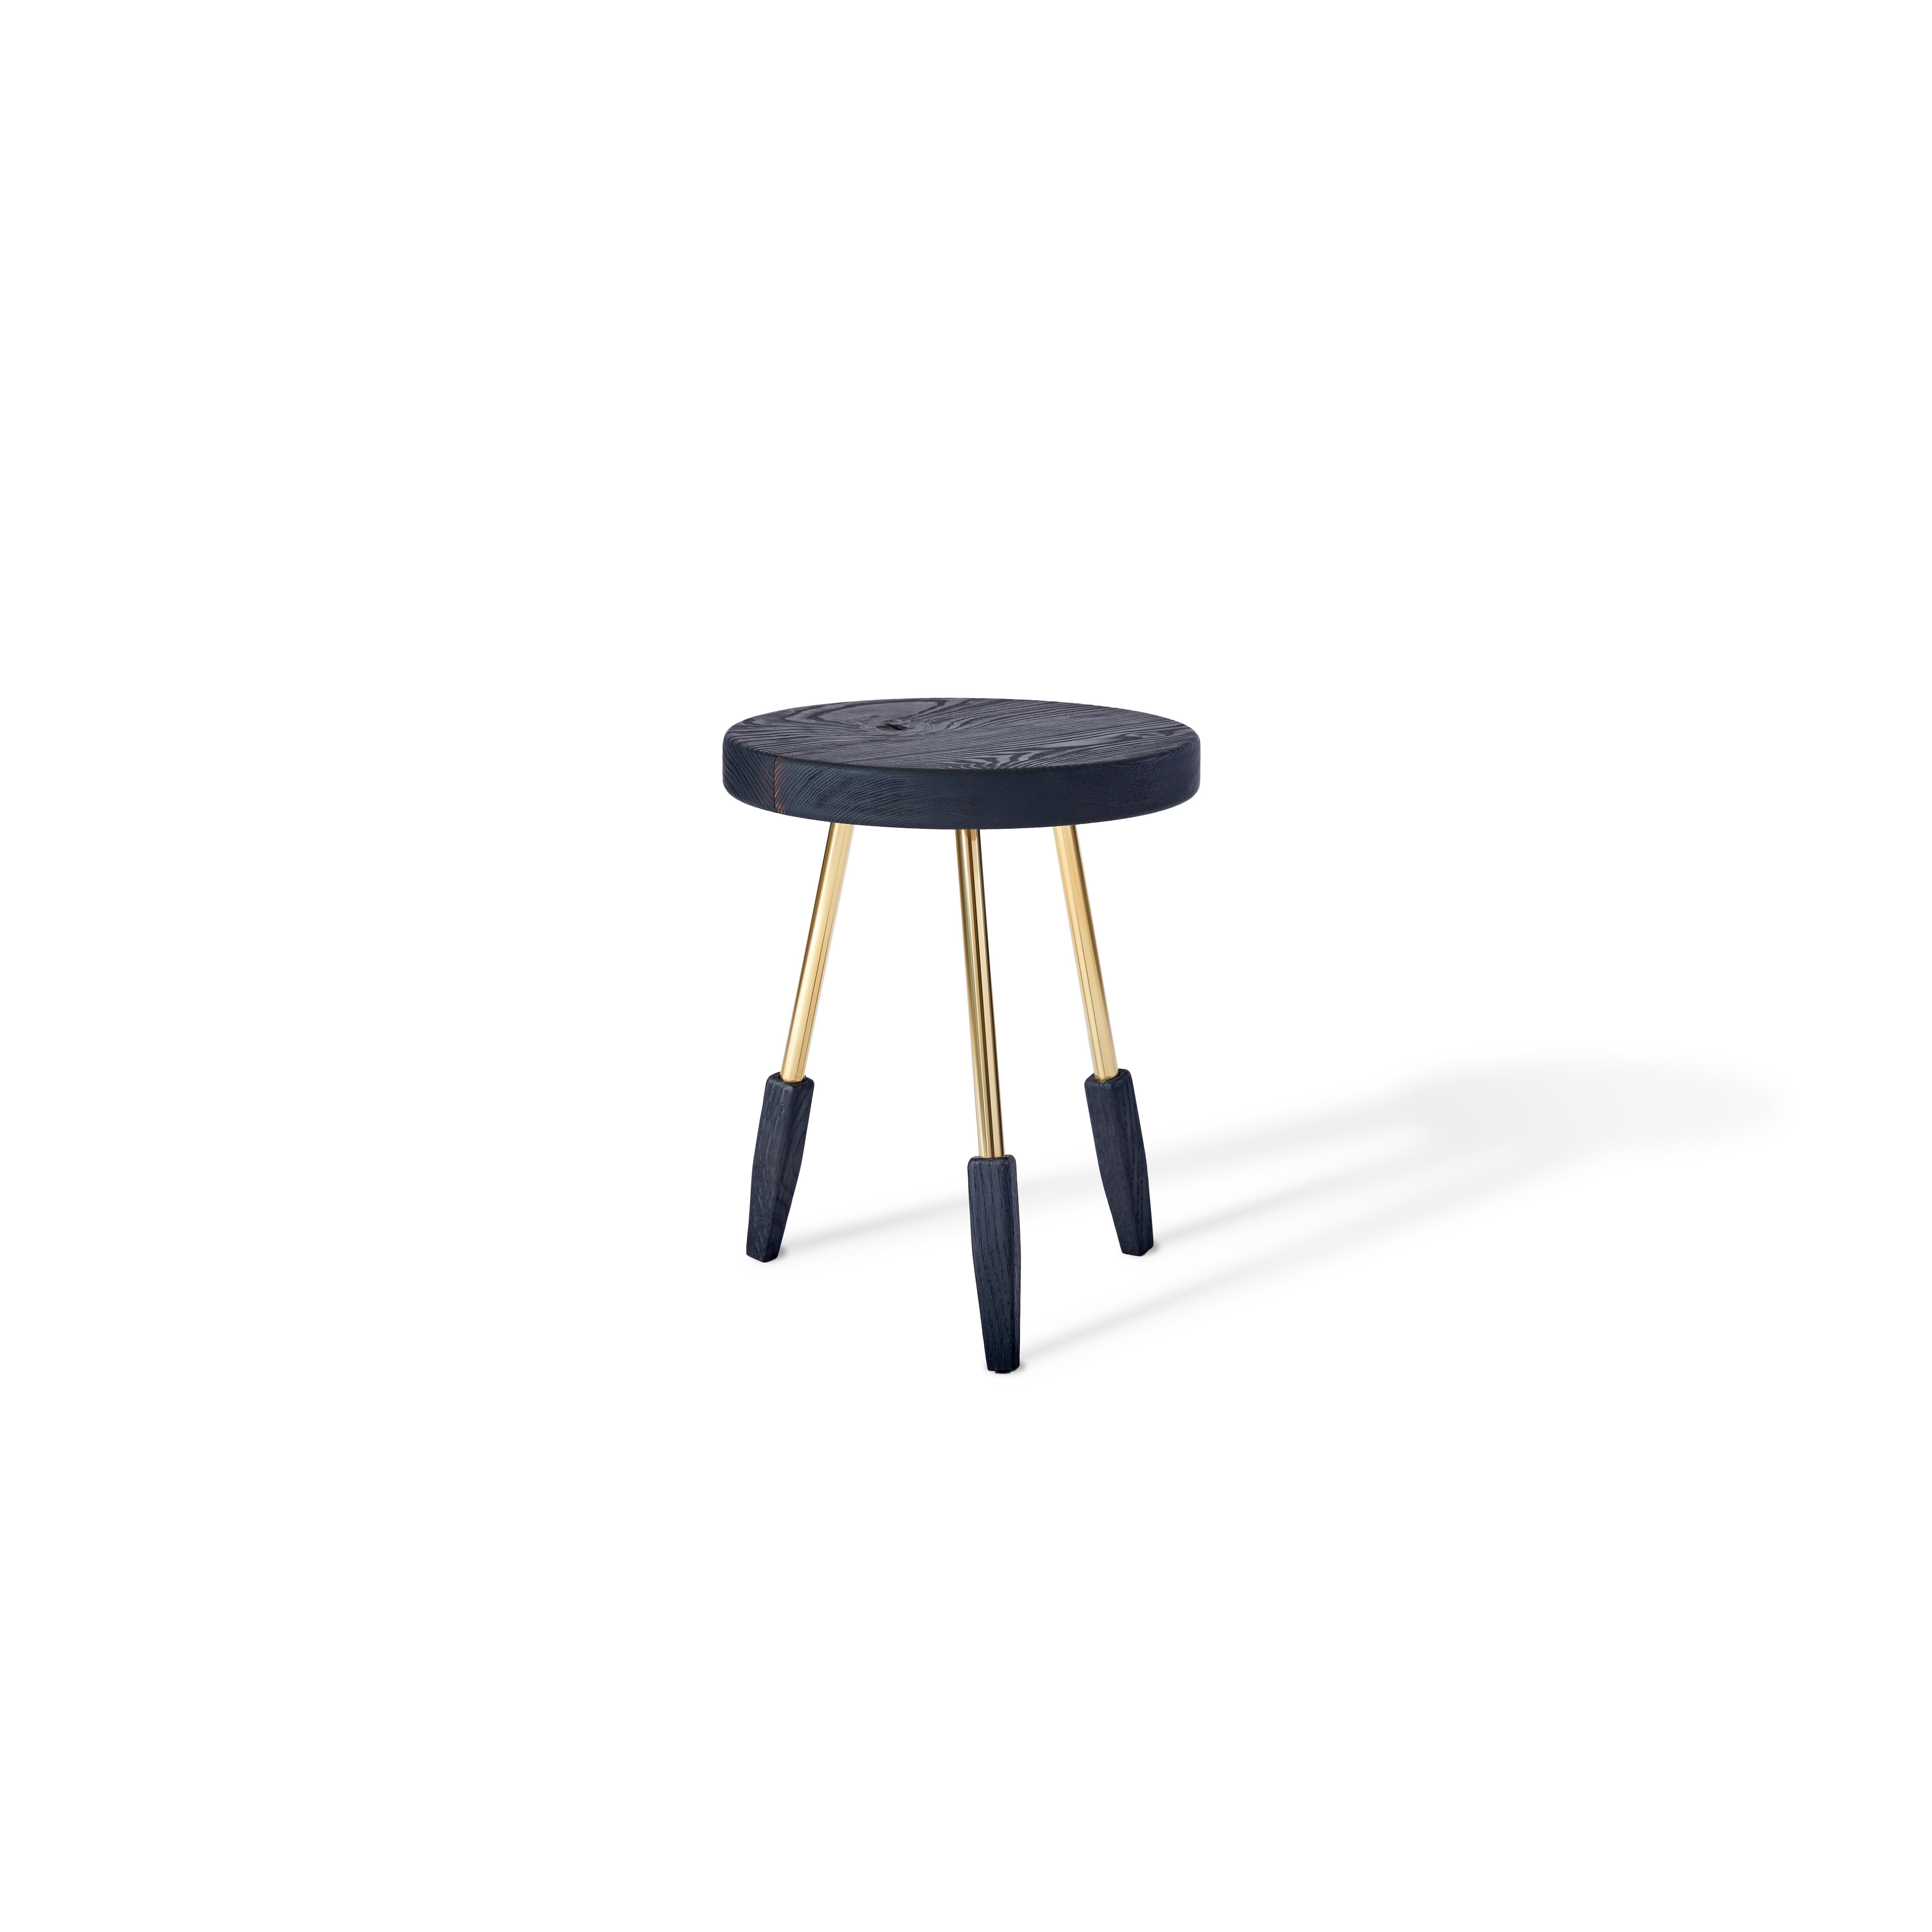 Milking stool with polished solid brass legs. Made in the USA by Casey McCafferty.

Image 1 shows oiled walnut
Image 2 shows charred ash
Image 3 shows oiled white oak 
Image 4 shows bleached white oak.

Available finishes:
Oiled black